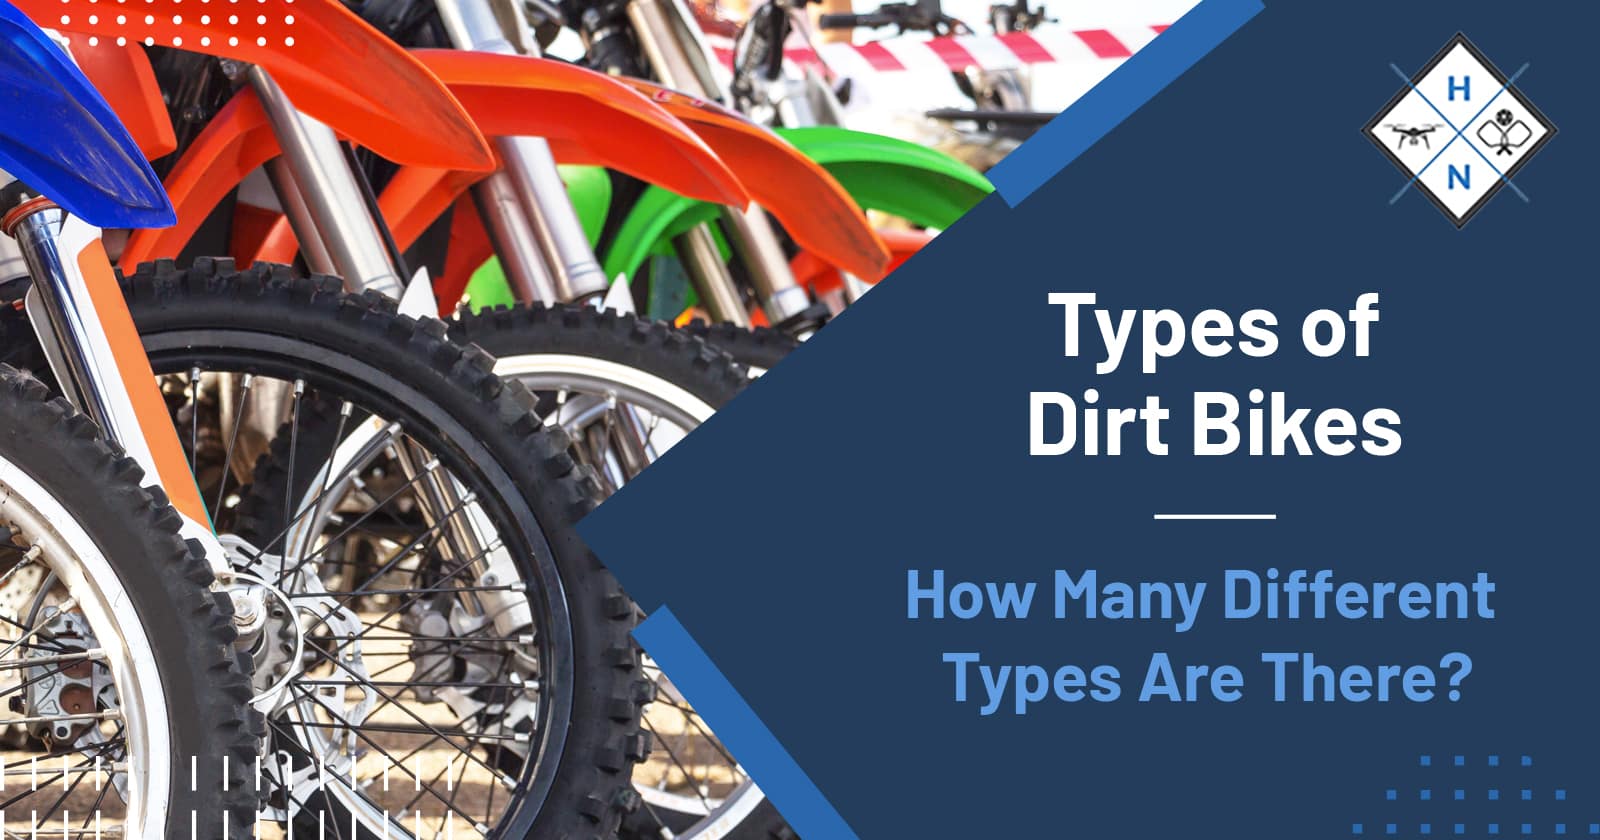 Types of Dirt Bikes – How Many Different Types Are There?